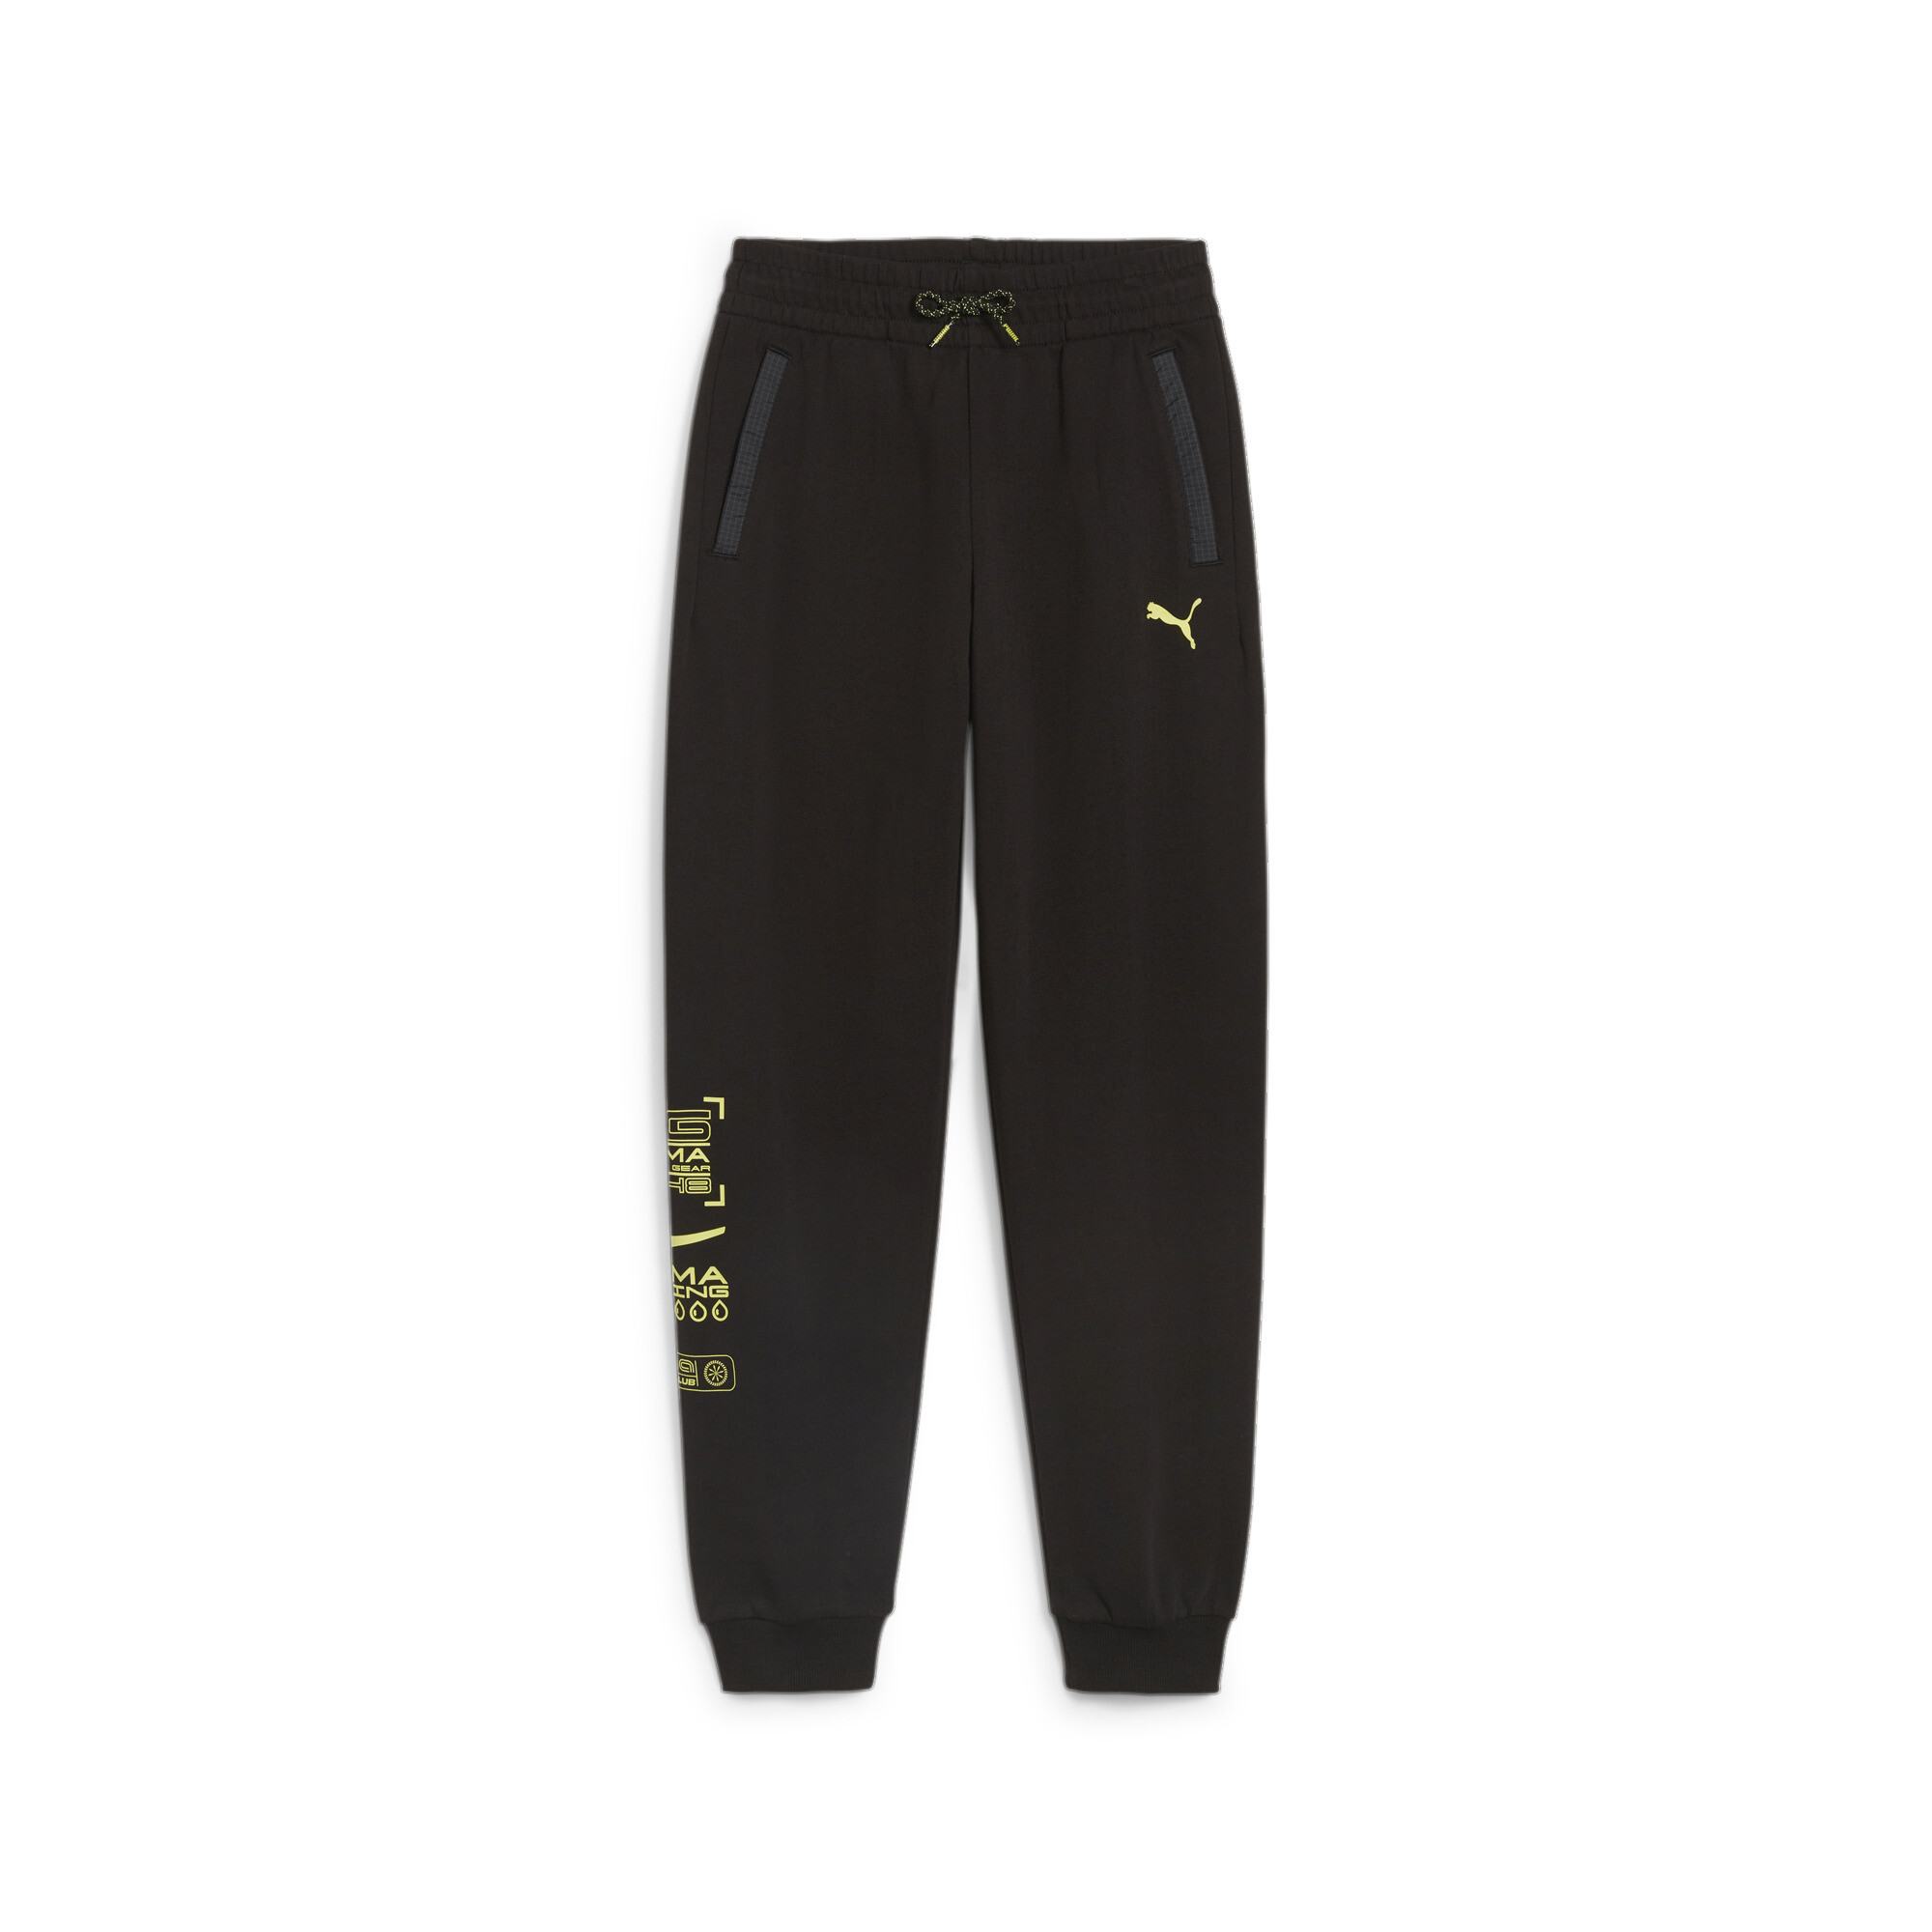 PUMA CLASSICS XCNTRY BKR Pants In Black, Size 13-14 Youth